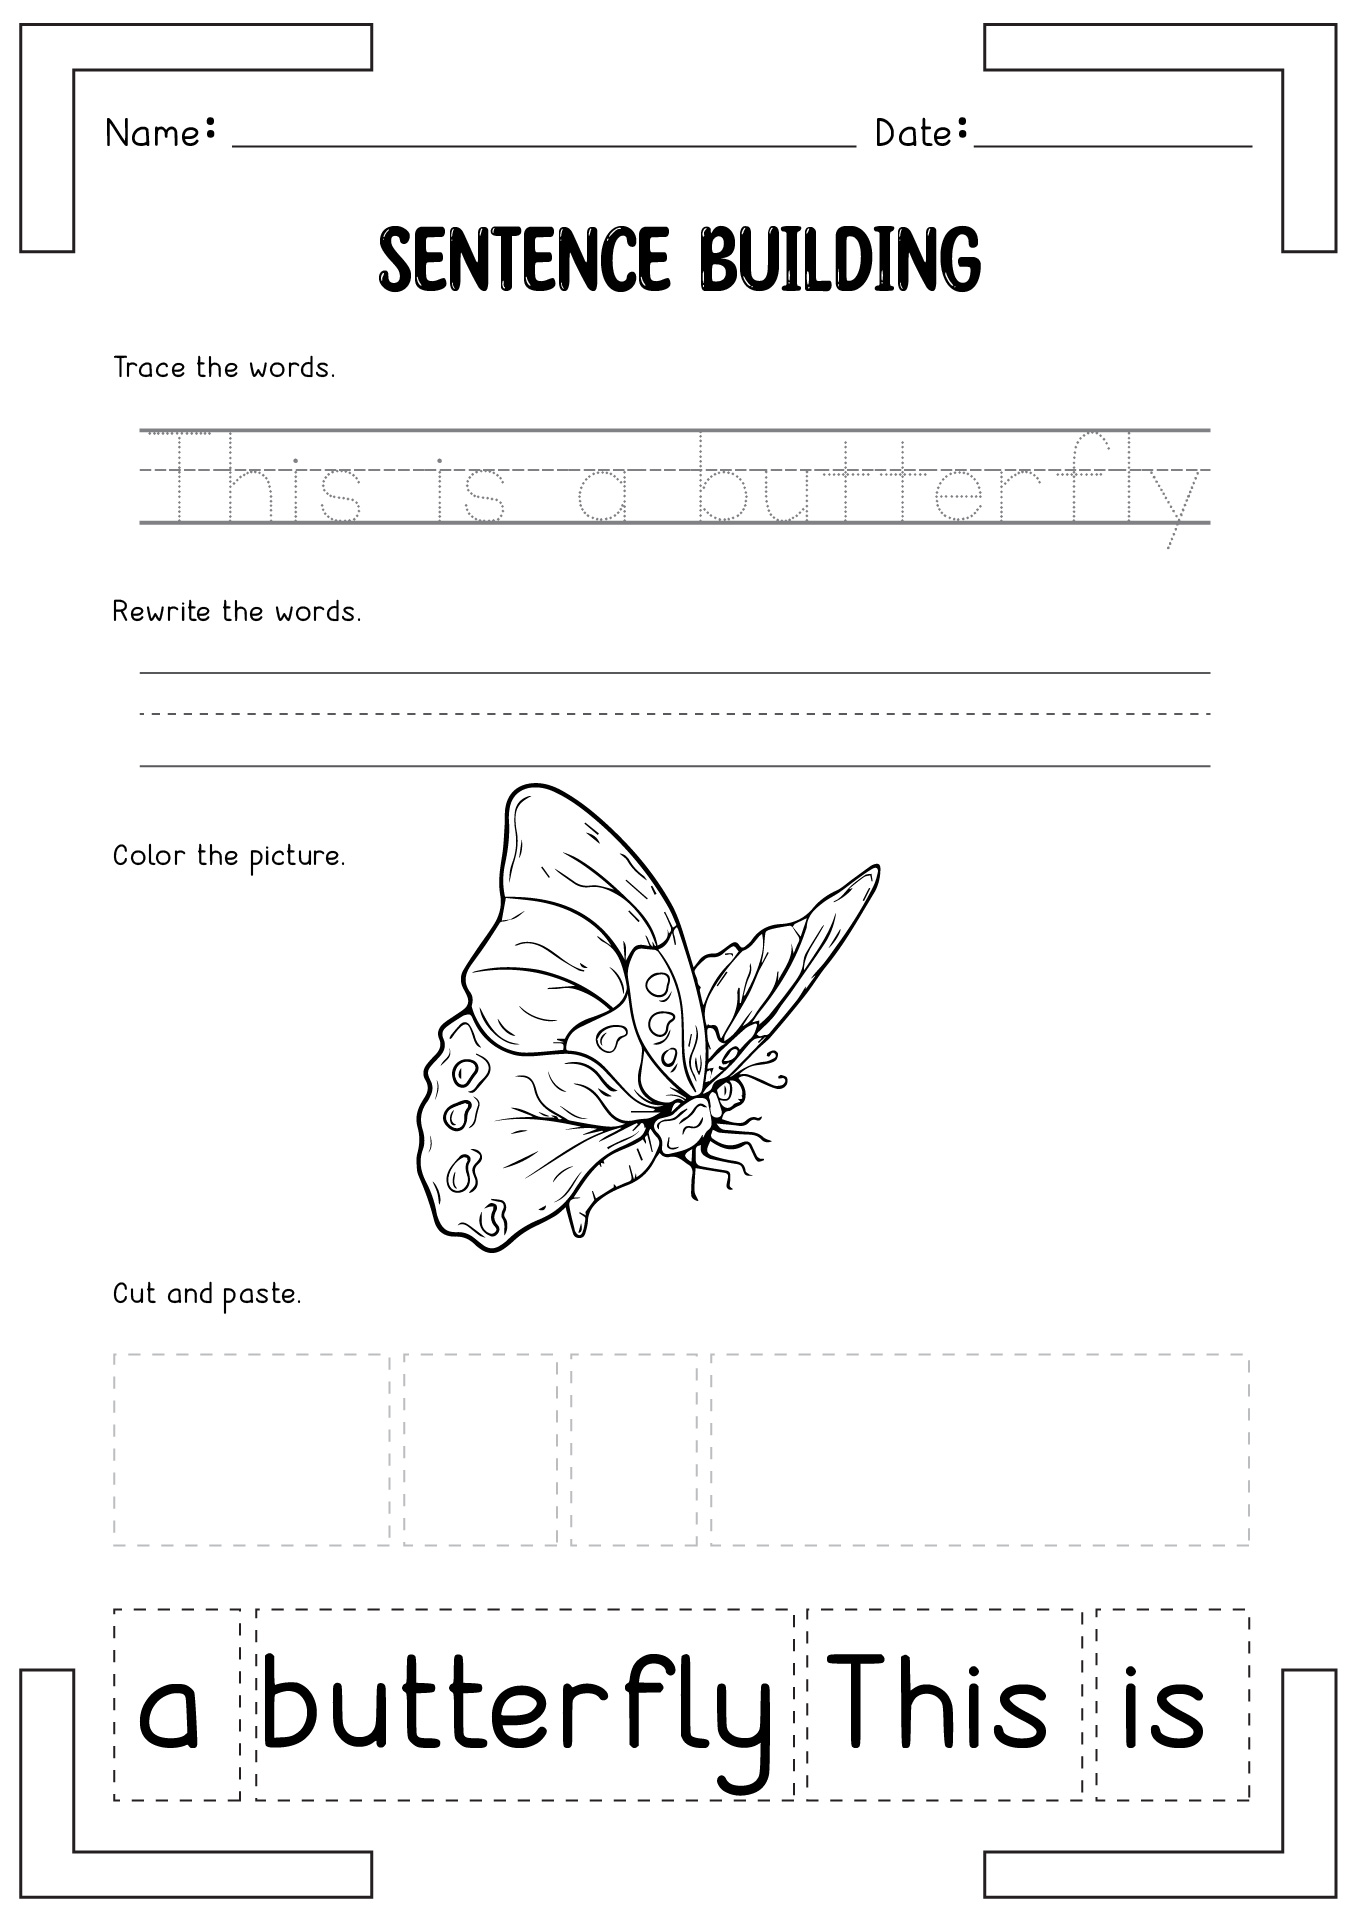 Cut and Paste Sentence Building Worksheets